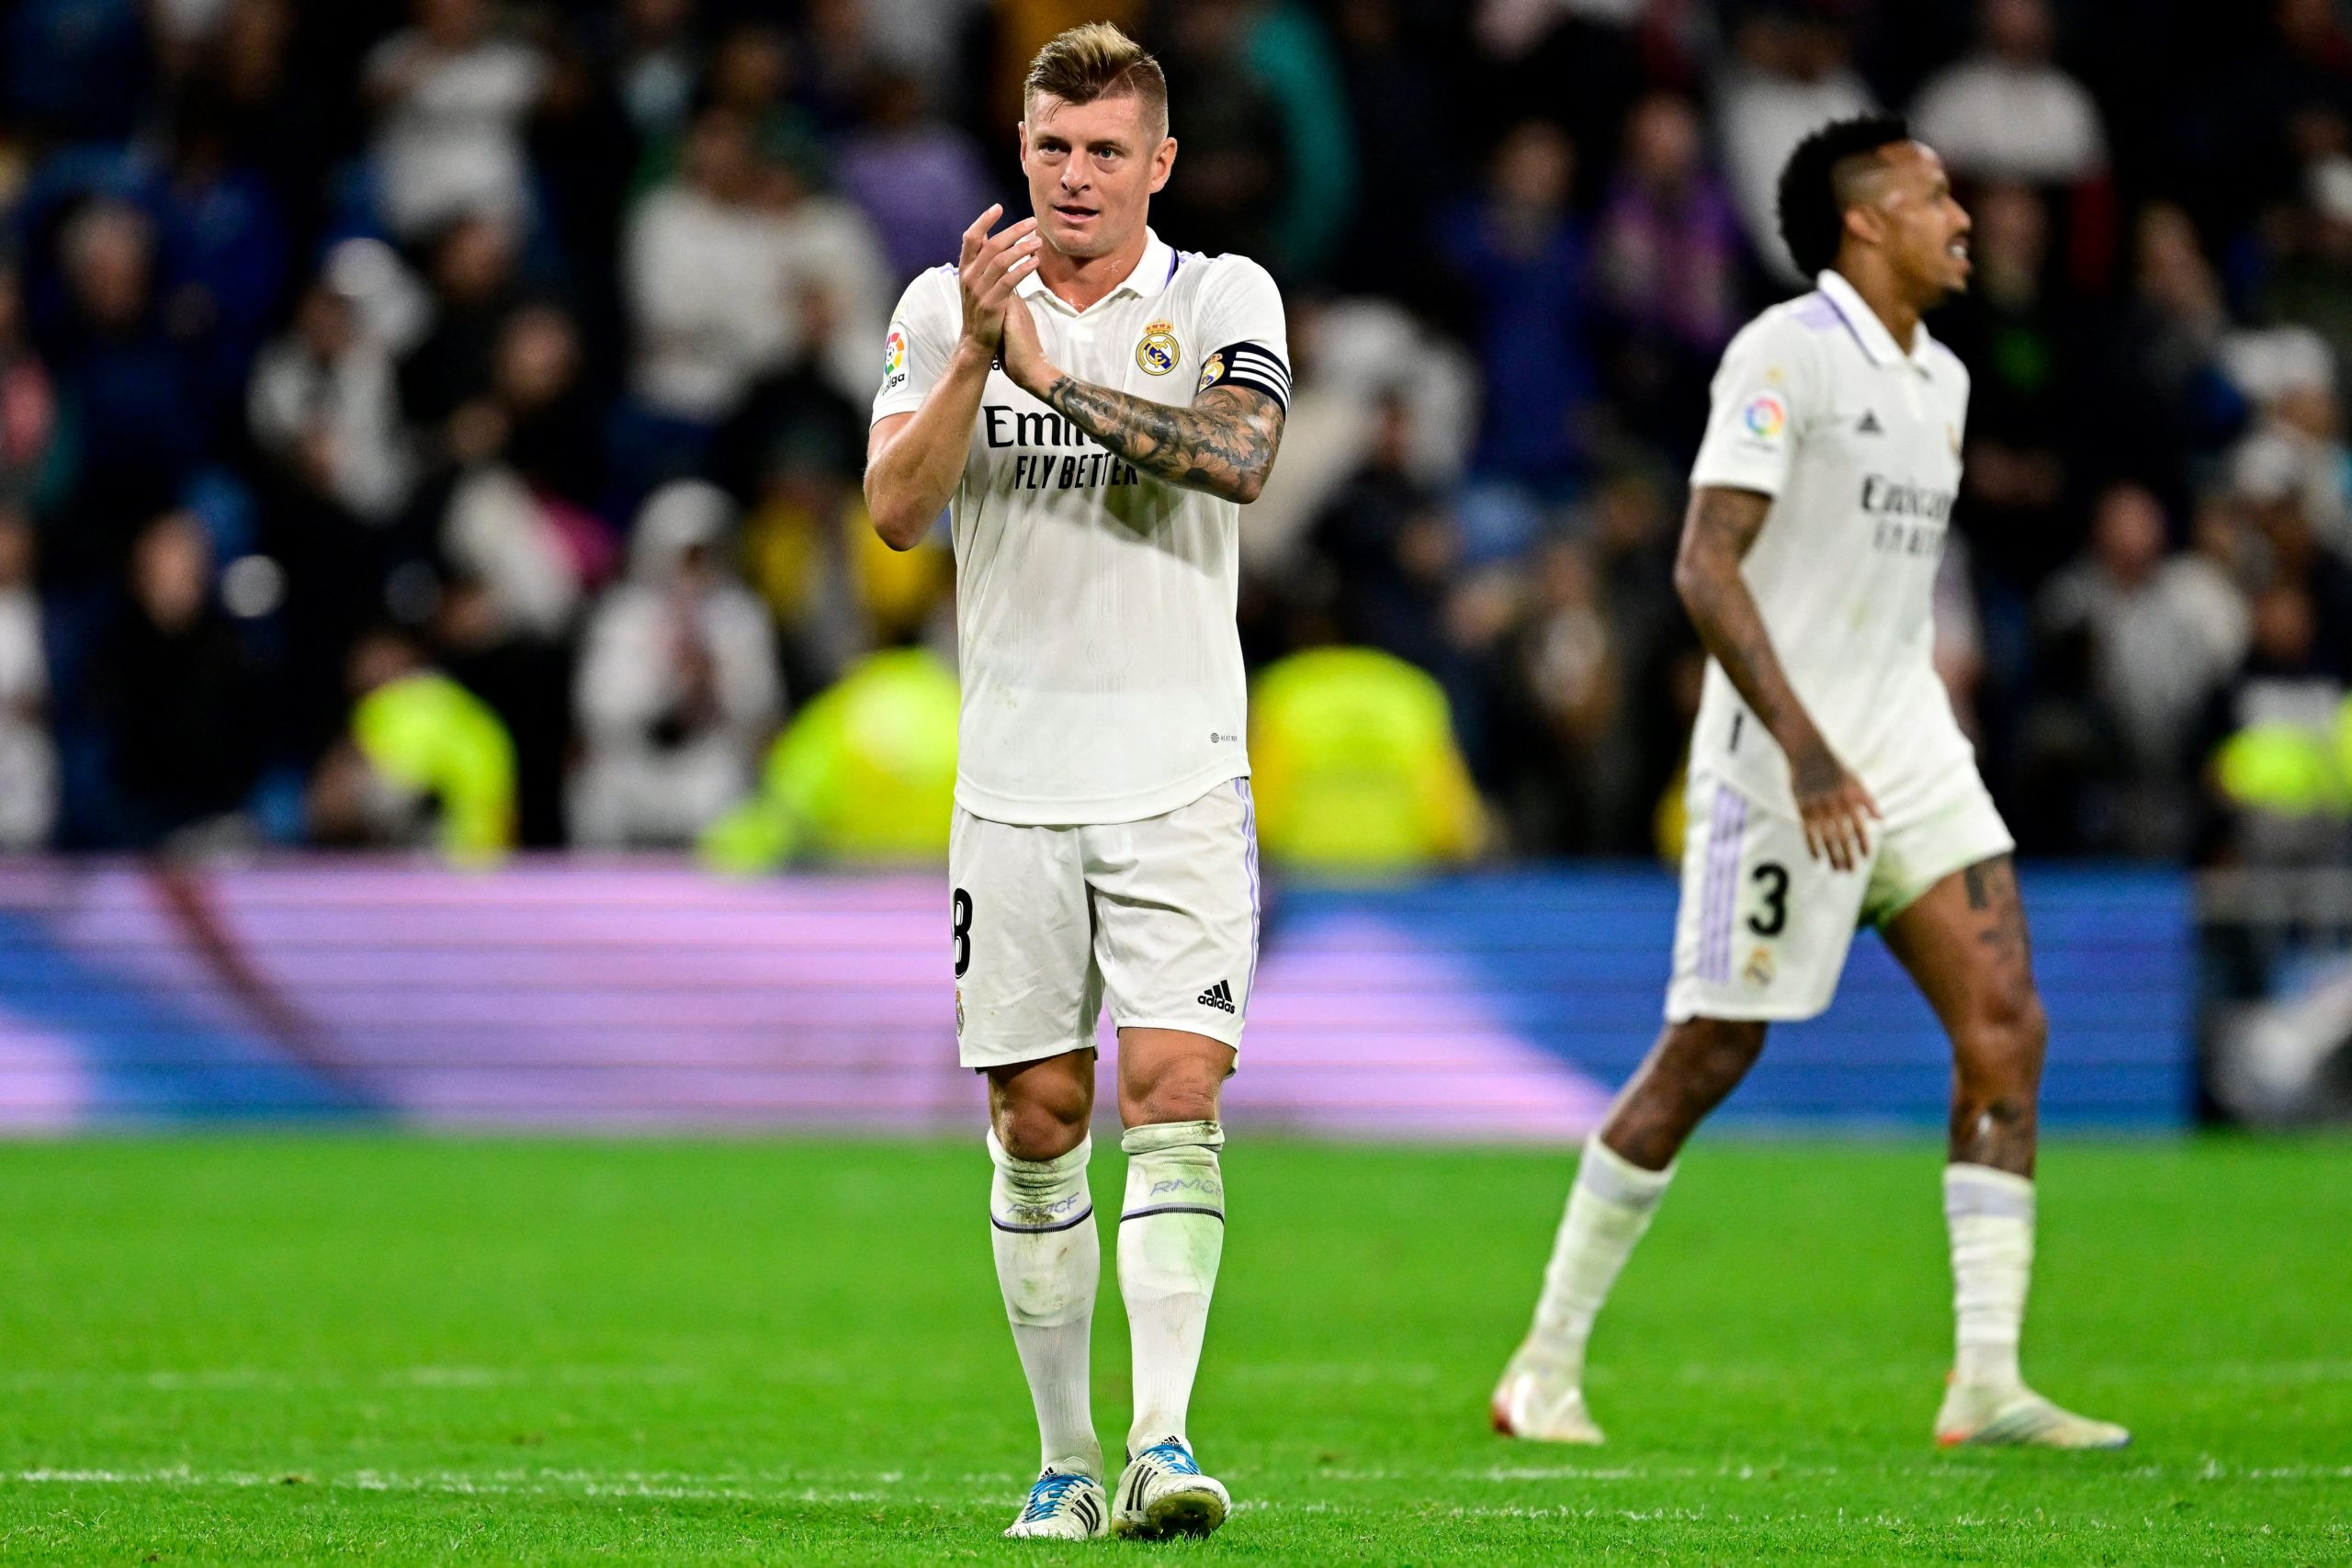 I'll retire at Real Madrid, says Kroos